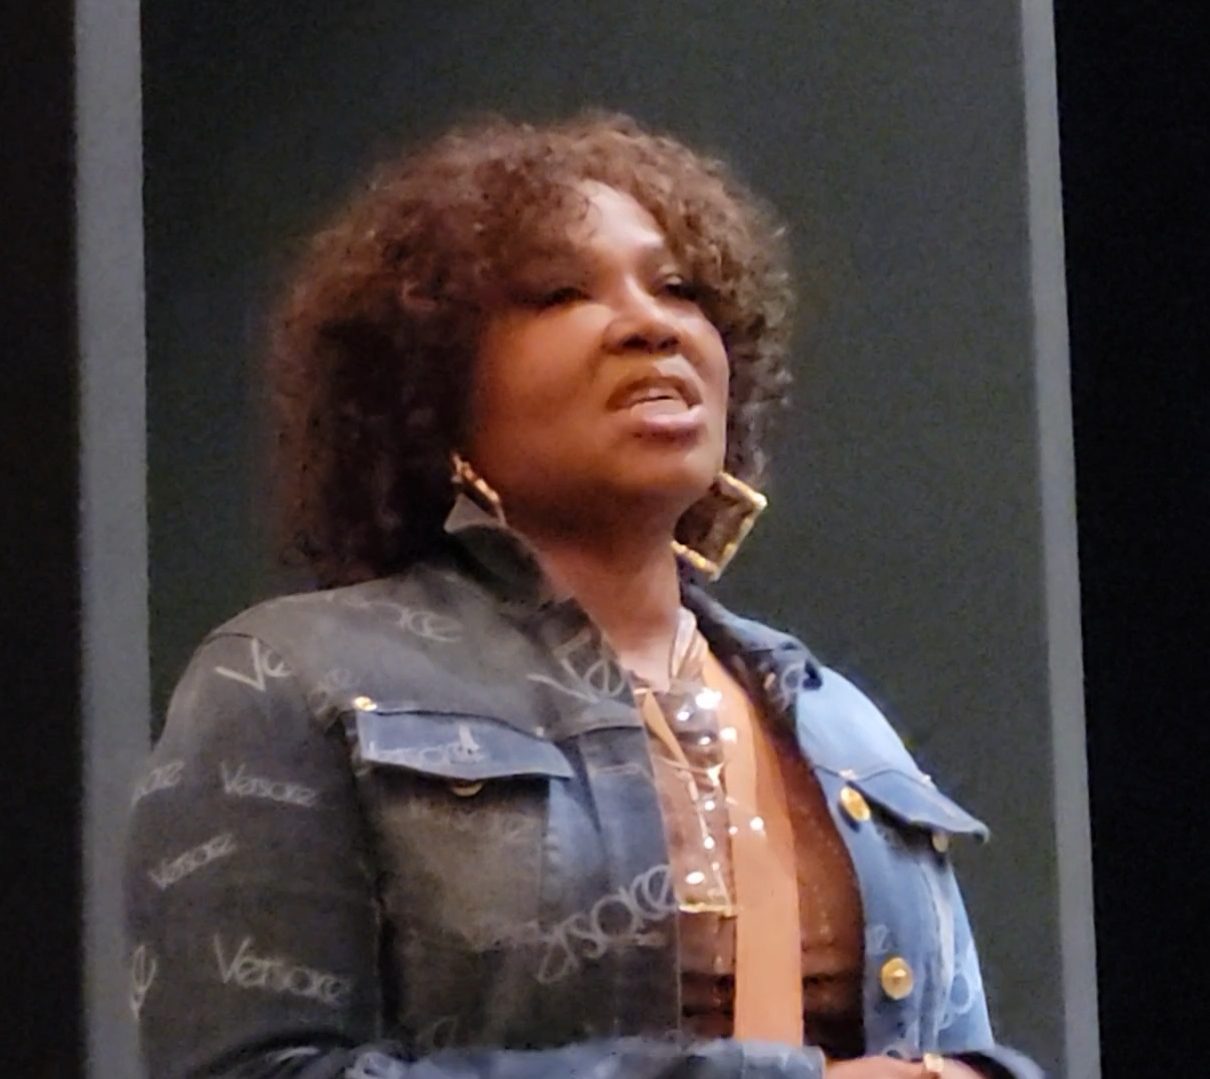 Mona Scott-Young speaks about her legendary career (Photo by Derrel Jazz Johnson for rollingout.com)